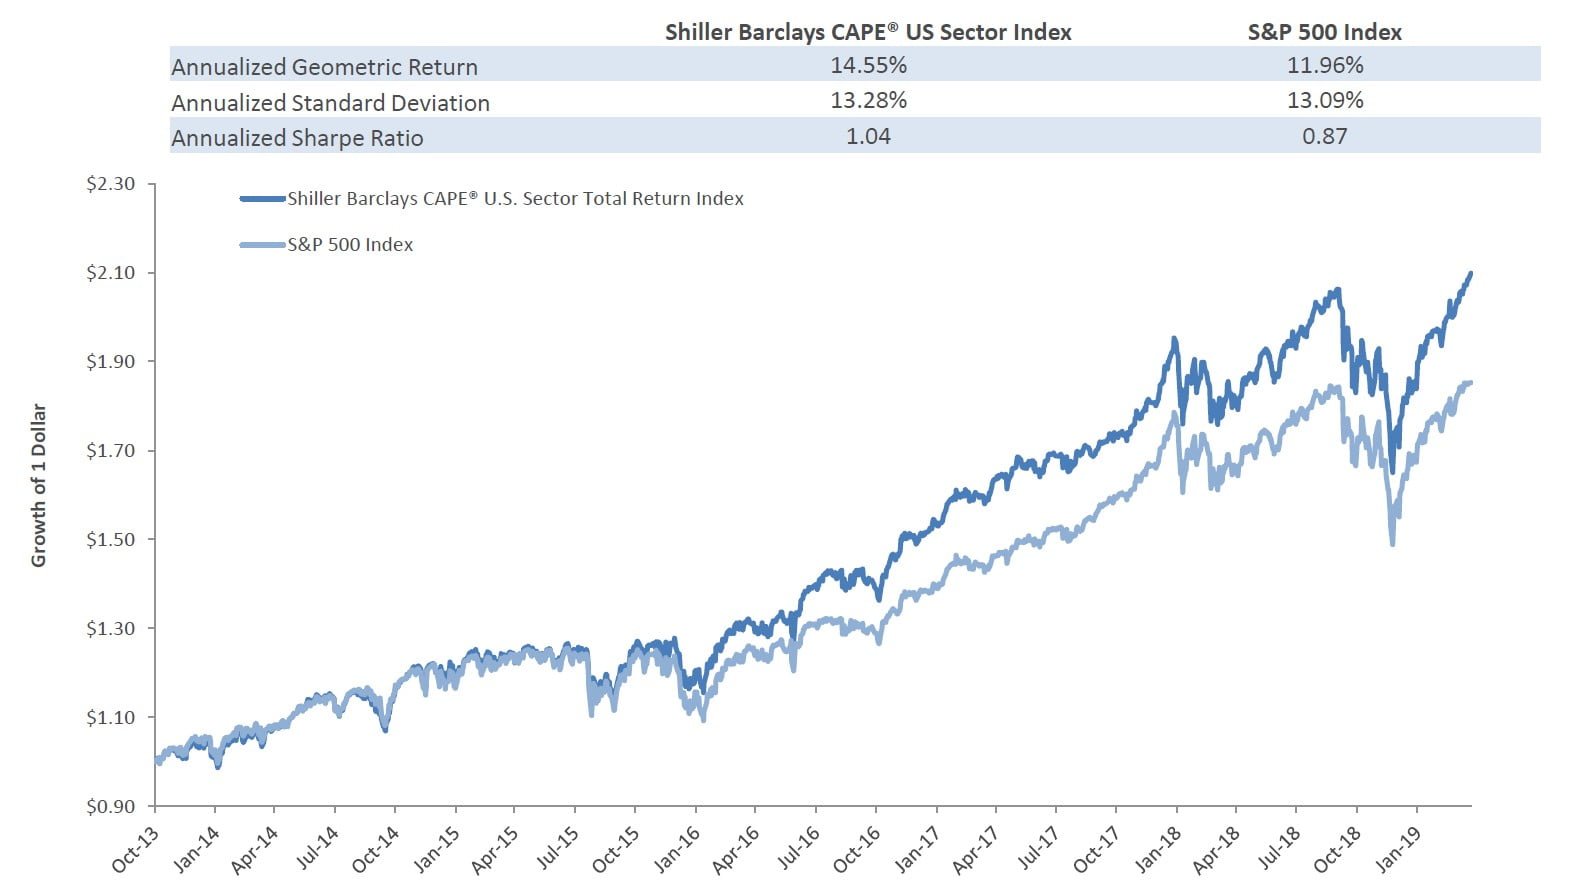 Cyclically Adjusted Price Earnings ratio